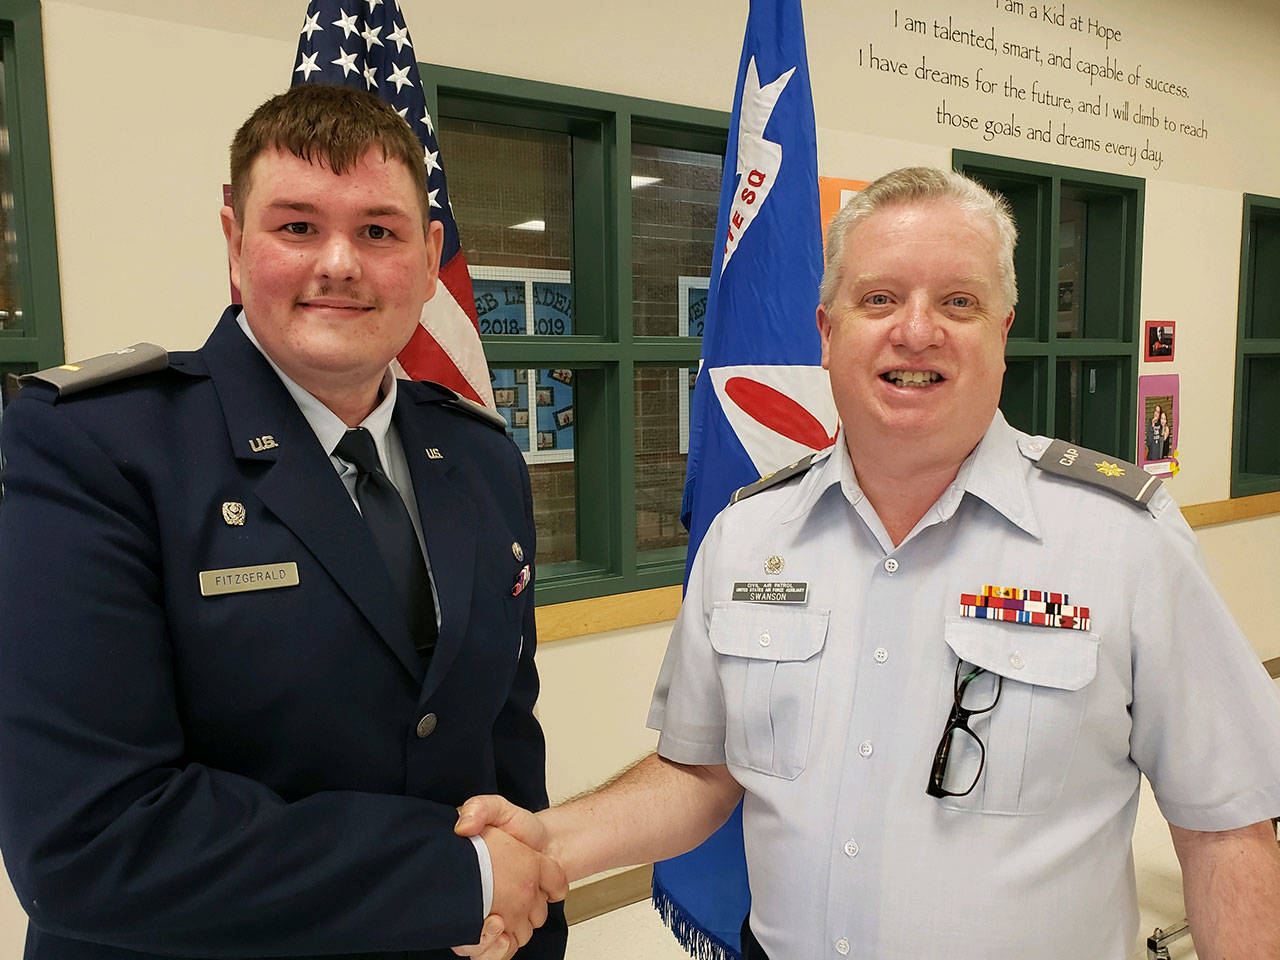 1st Lt. Darren Fitzgerald, left, relieves Maj. Mark Swanson, CAP, of command of the Dungeness Composite Squadron of the Civil Air Patrol in late May. Submitted photo